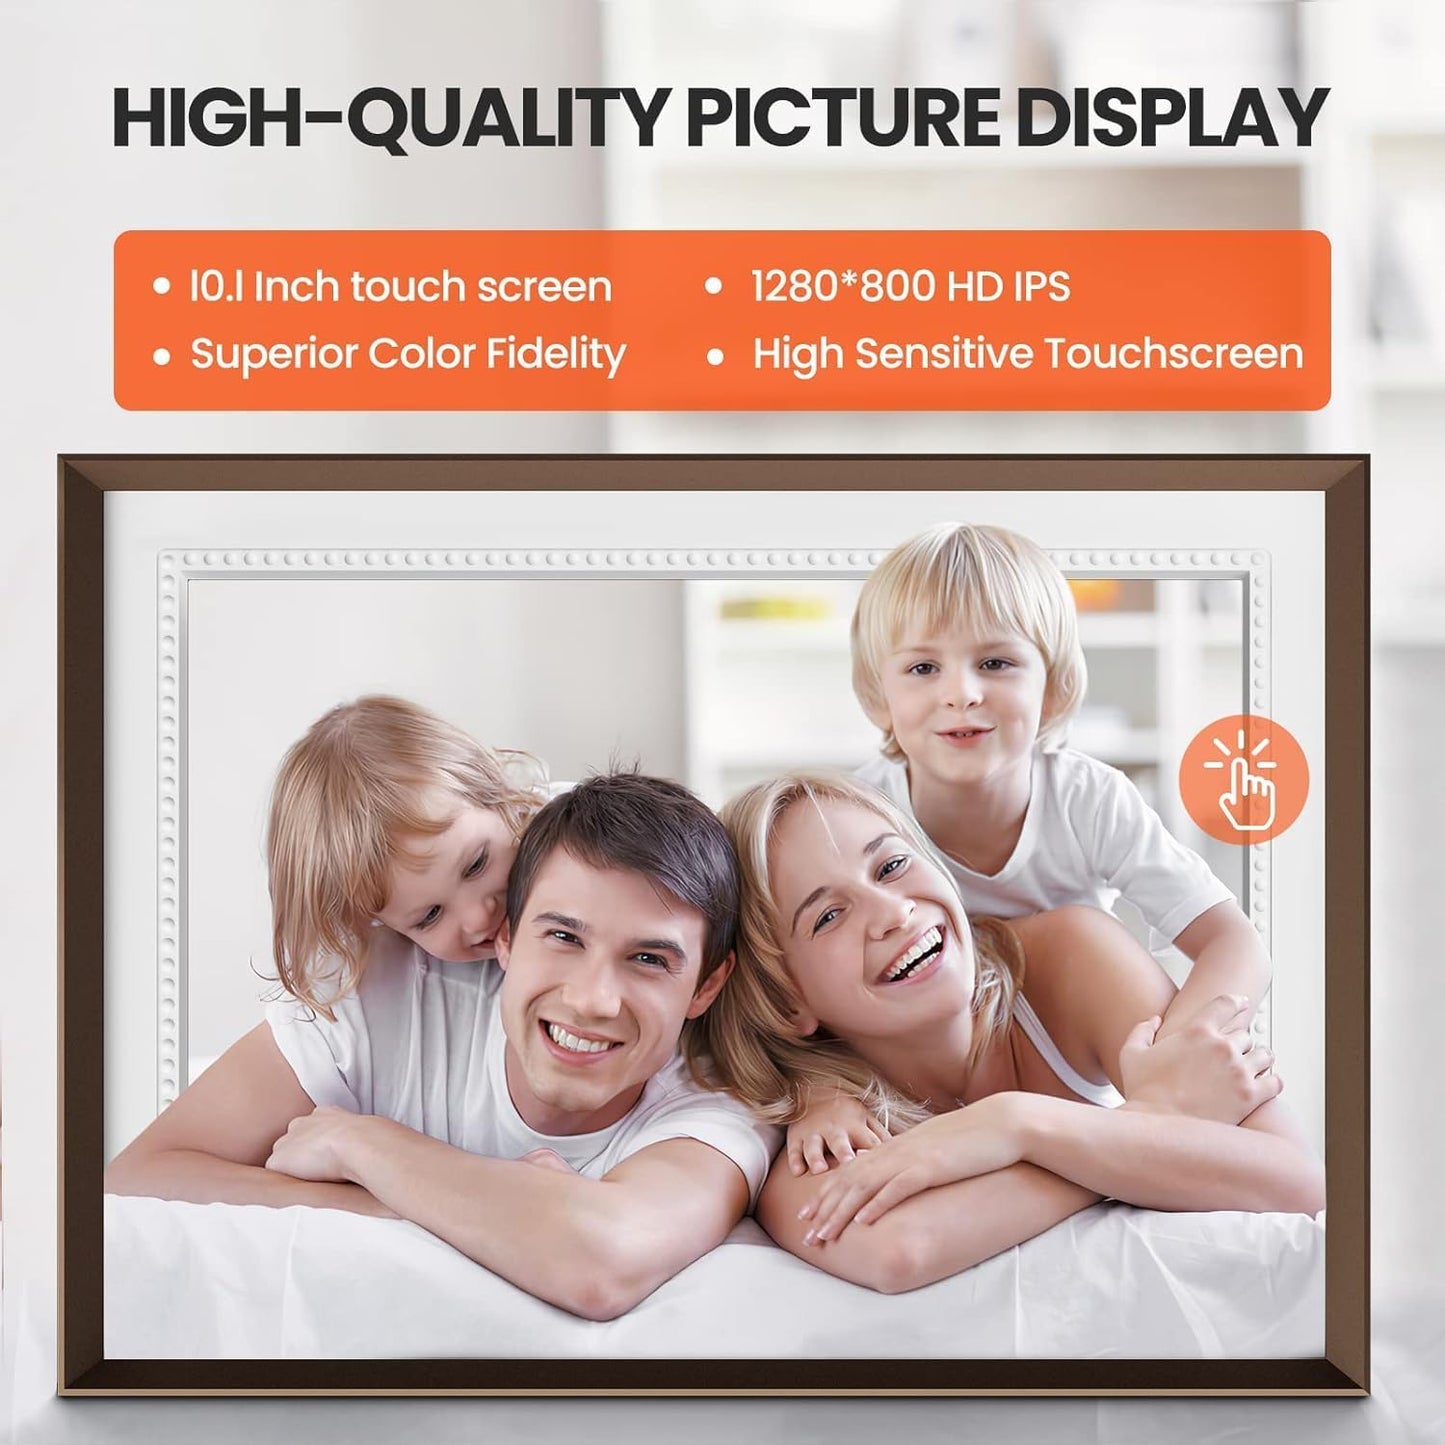 Jazeyeah 10.1 Digital Picture Frame 1280 * 800 HD Touch Screen, 16GB Storage Capacity, Easy to Record Life's Little by Little, is a Precious Gift for Friends and Family